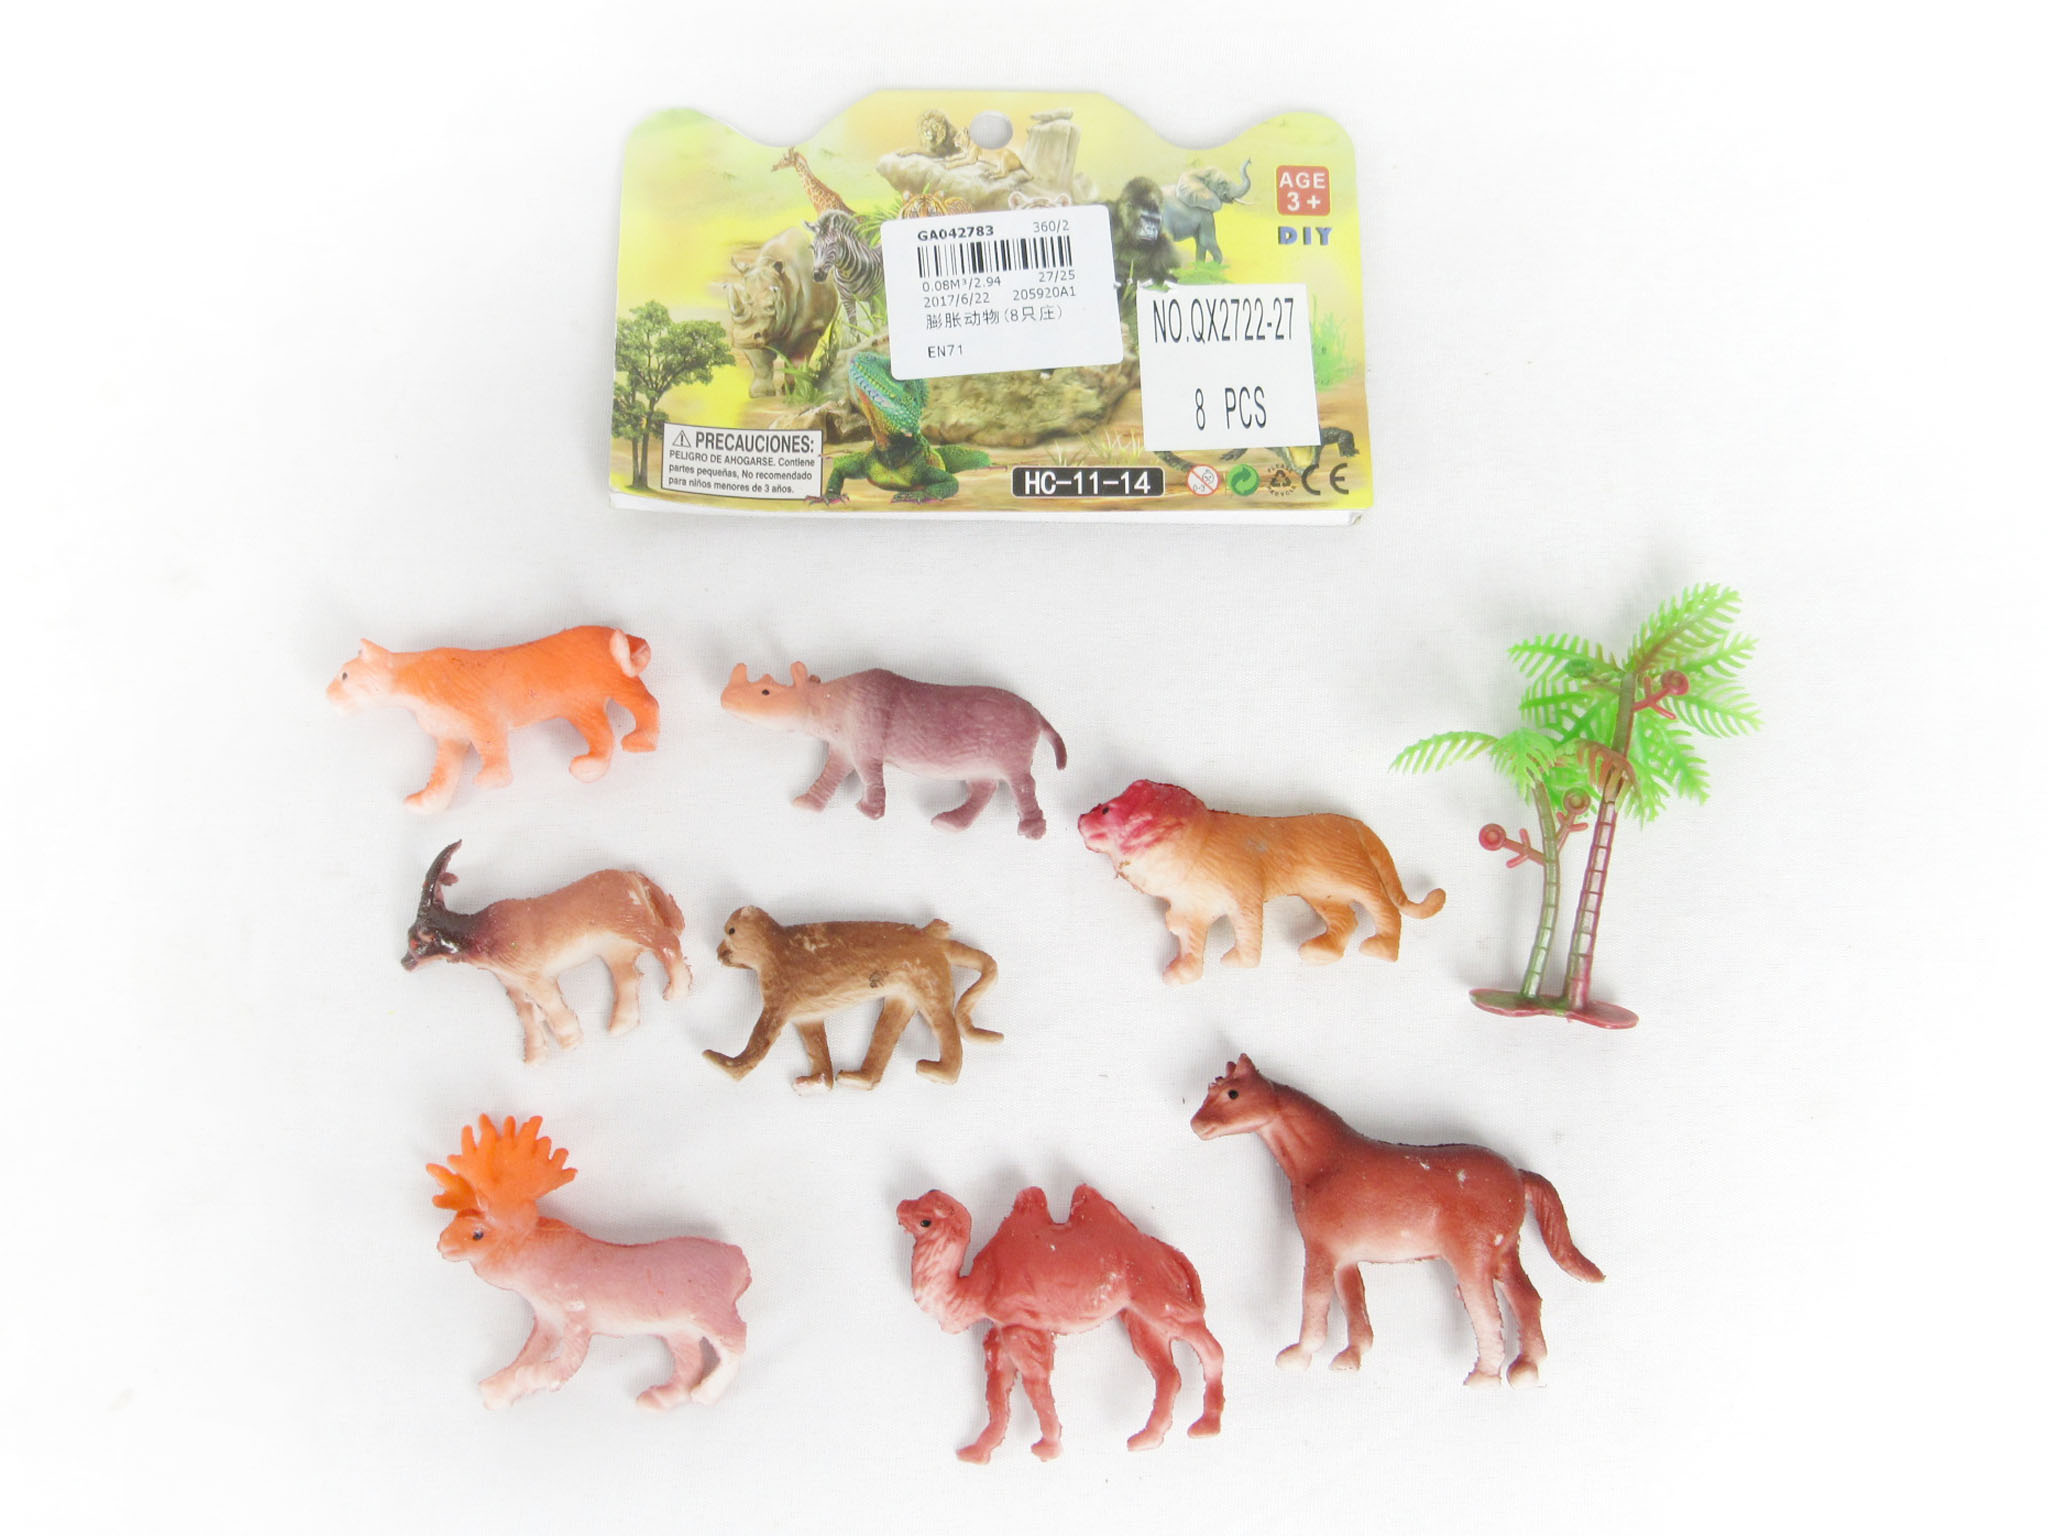 Smell Animal(8in1) toys